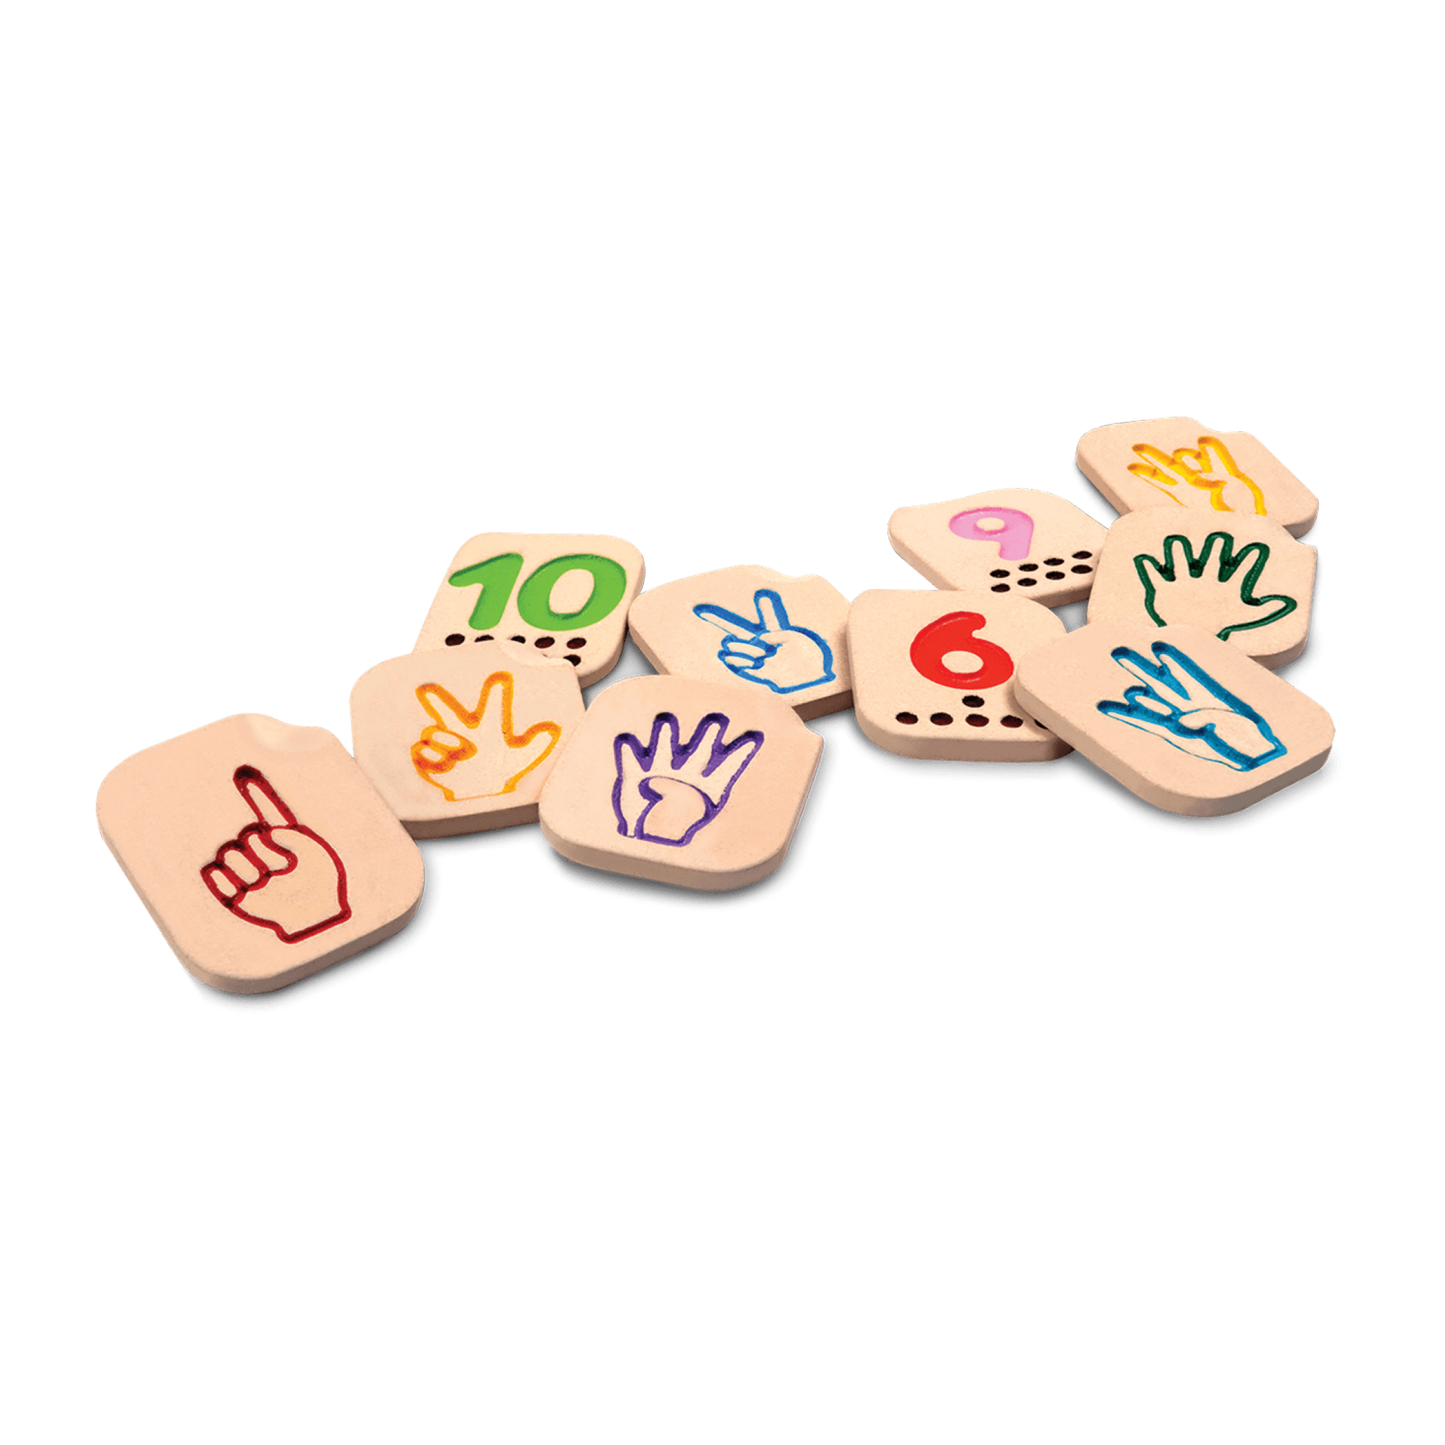 The 10-piece set features impressed numbers, counting dots, and American Sign Language illustrations that help children learn numbers in various ways.